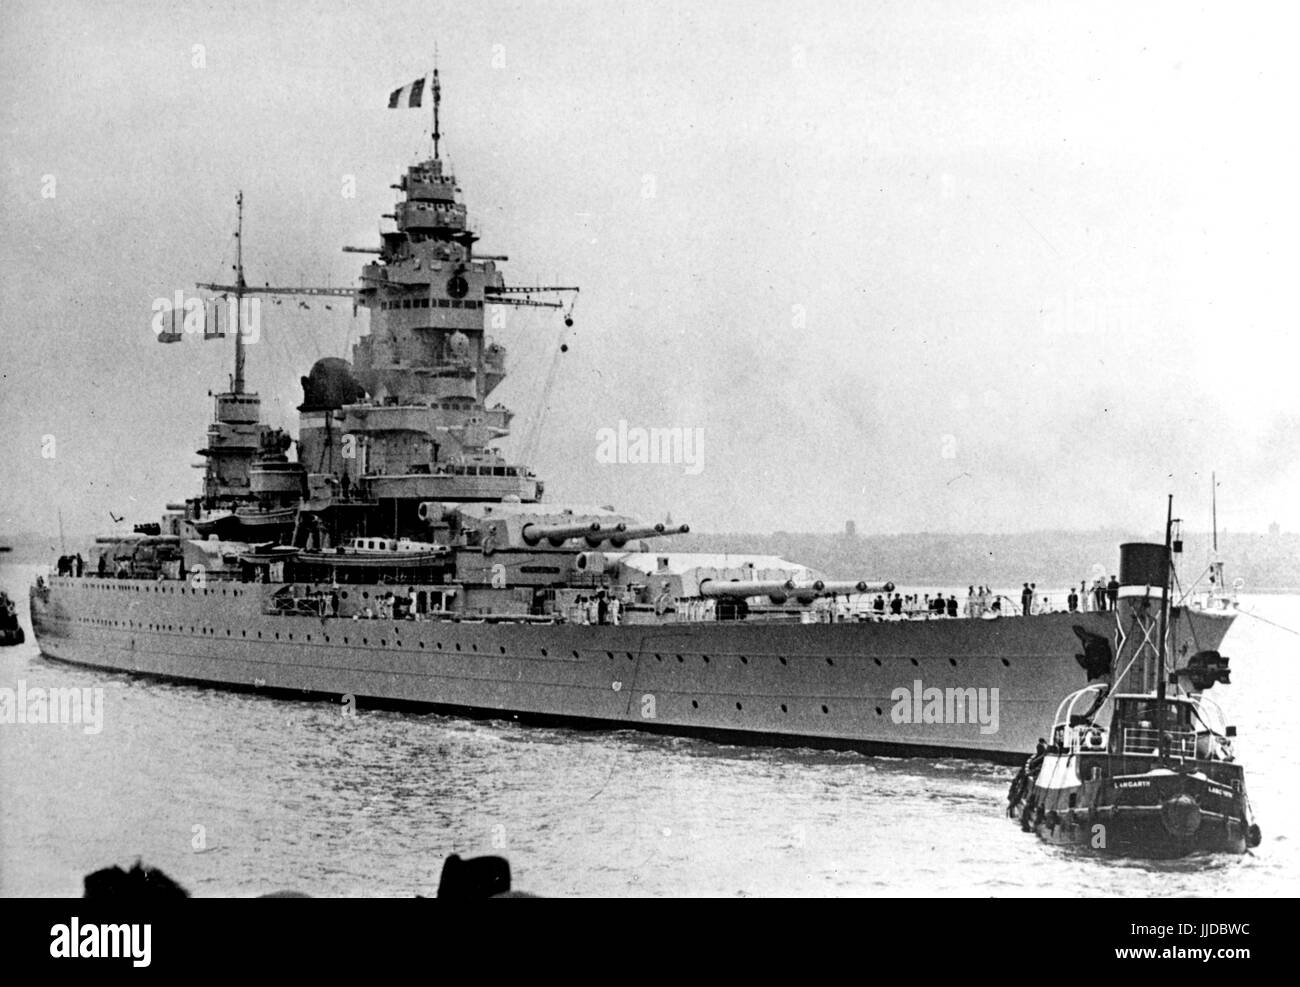 The Nazi propaganda picture shows the French warship Dunkerque  armed with a main battery of eight 330mm guns arranged in two quadruple gun turrets, around 1939. Fotoarchiv für Zeitgeschichte - NO WIRE SERVICE | usage worldwide Stock Photo